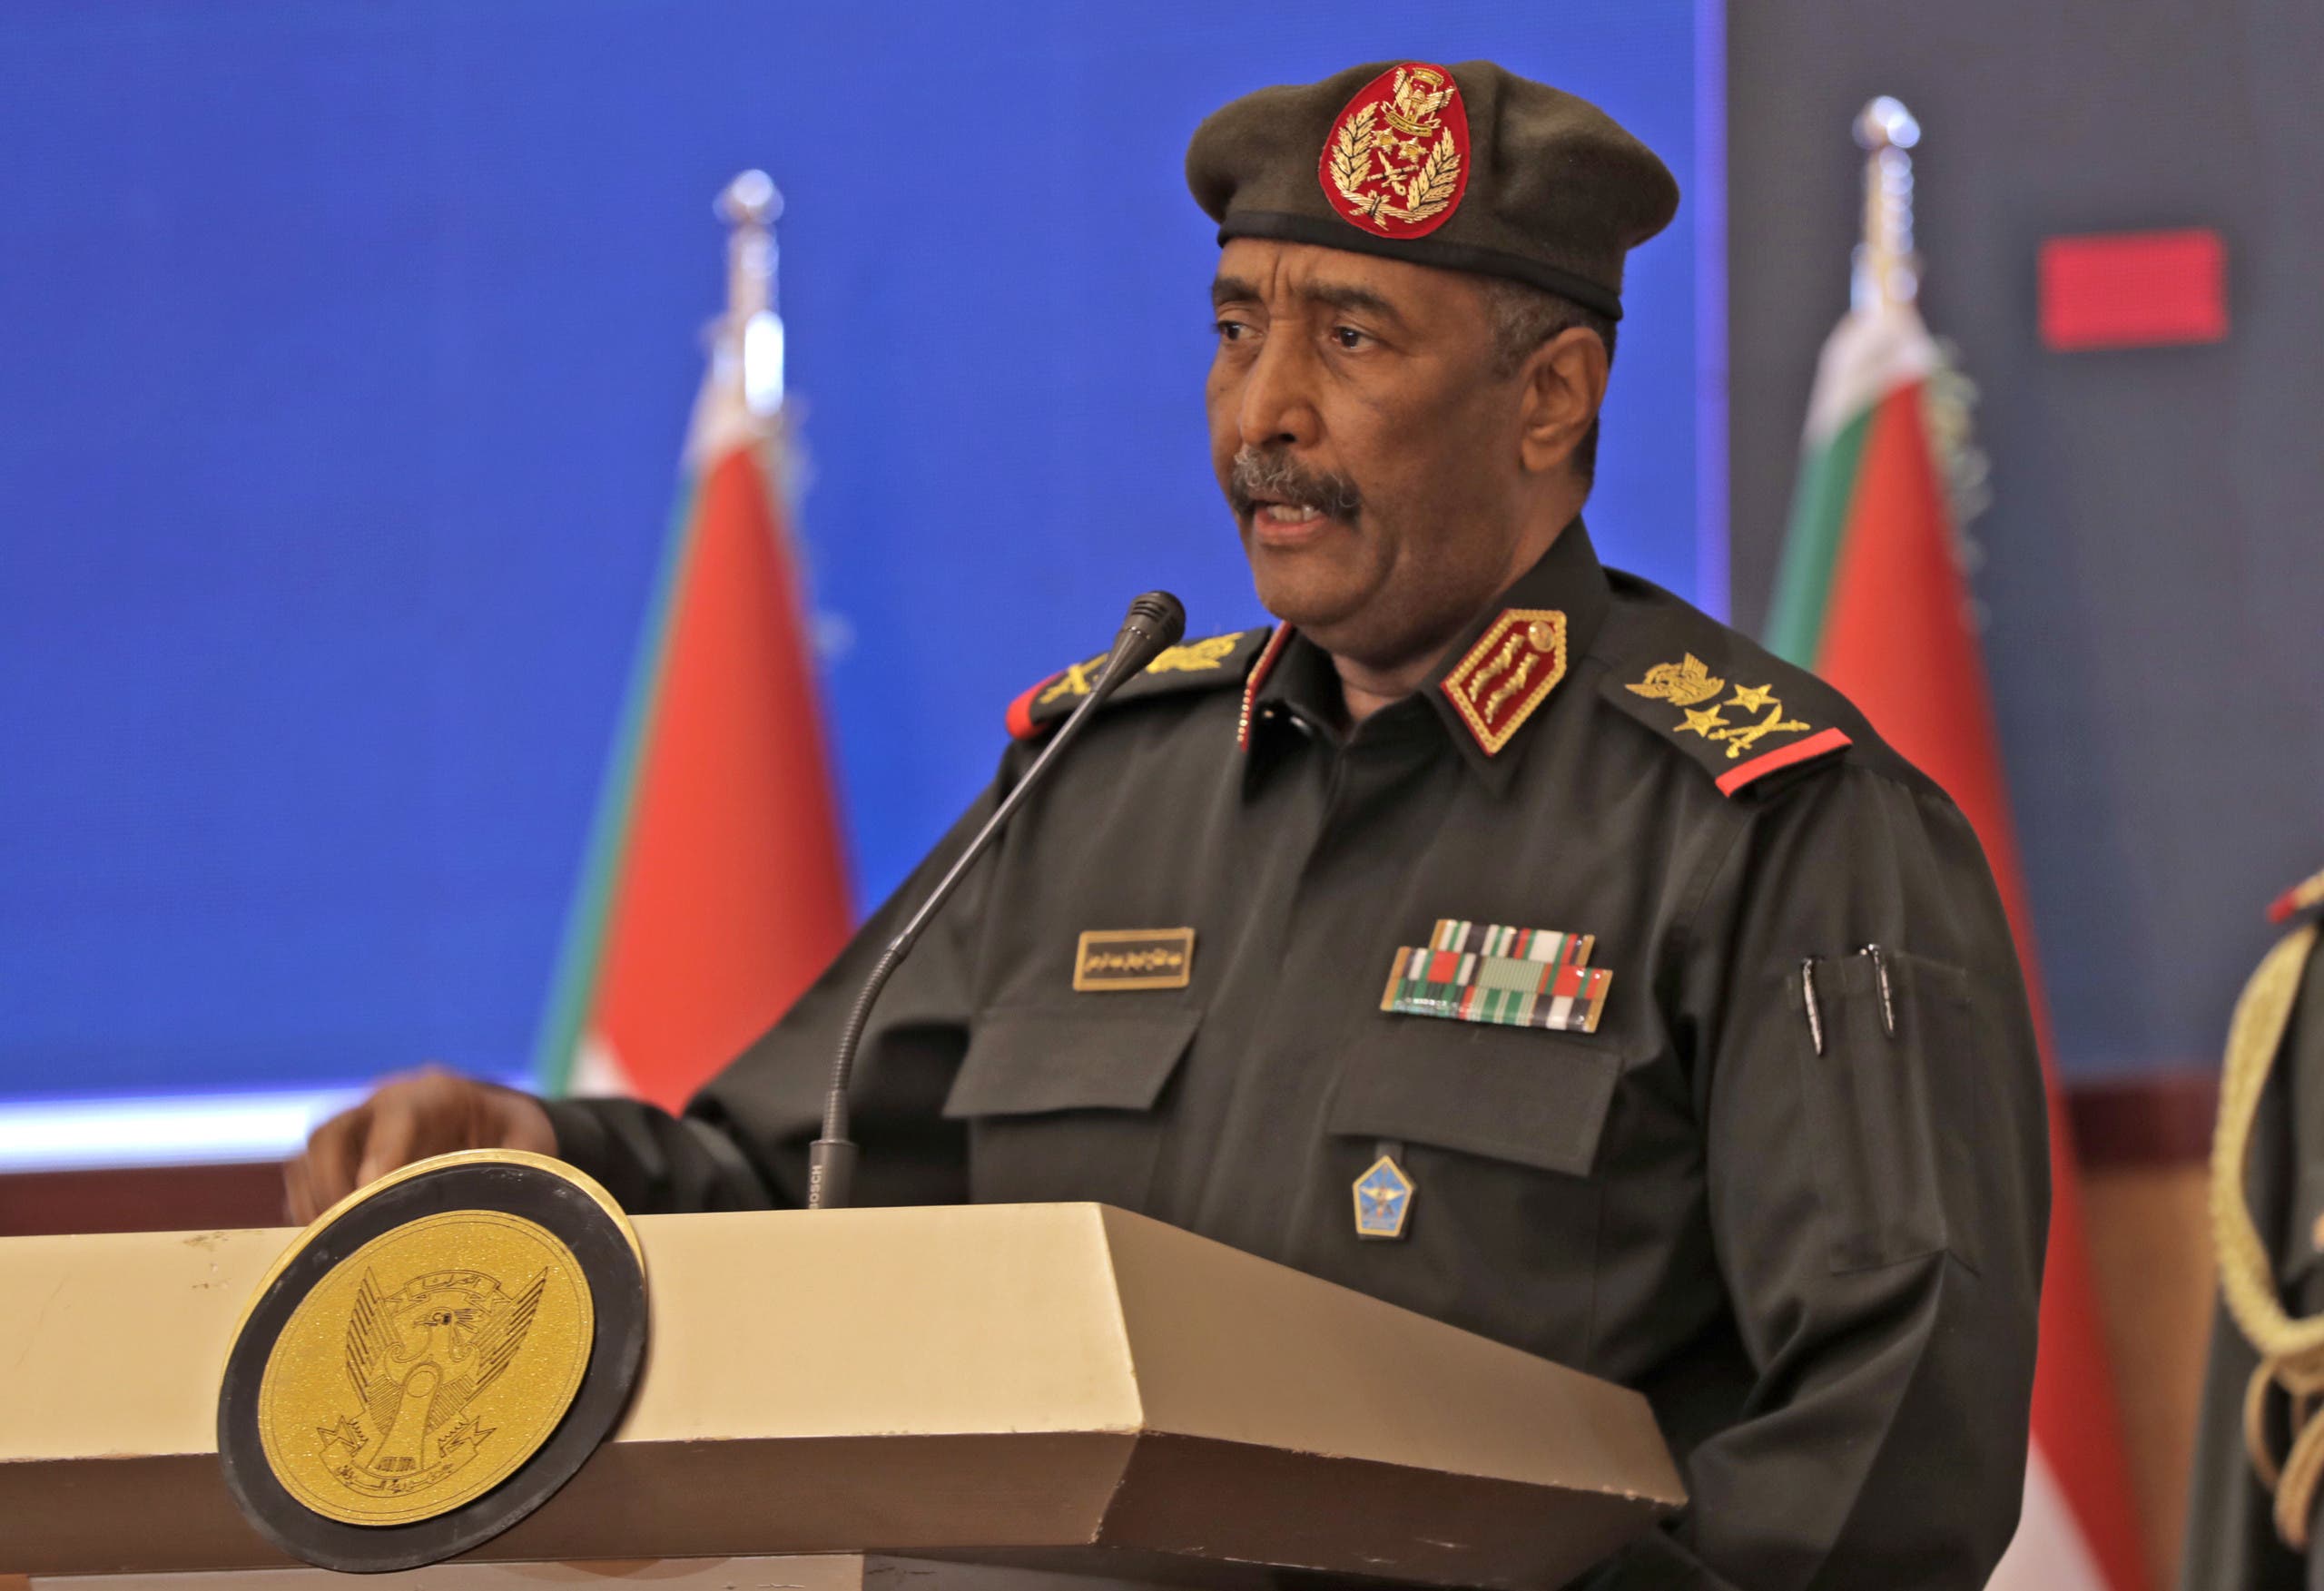 Sudan's top general Abdel Fattah al-Burhan speaks following a deal-signing ceremony with Prime Minister Abdalla Hamdok (unseen) to restore the transition to civilian rule in the country in the capital Khartoum, on November 21, 2021. Nearly a month after Sudan's top general ousted the prime minister, they signed a breakthrough deal to reverse the military takeover that had sparked international condemnation and mass protests. (Photo by AFP)